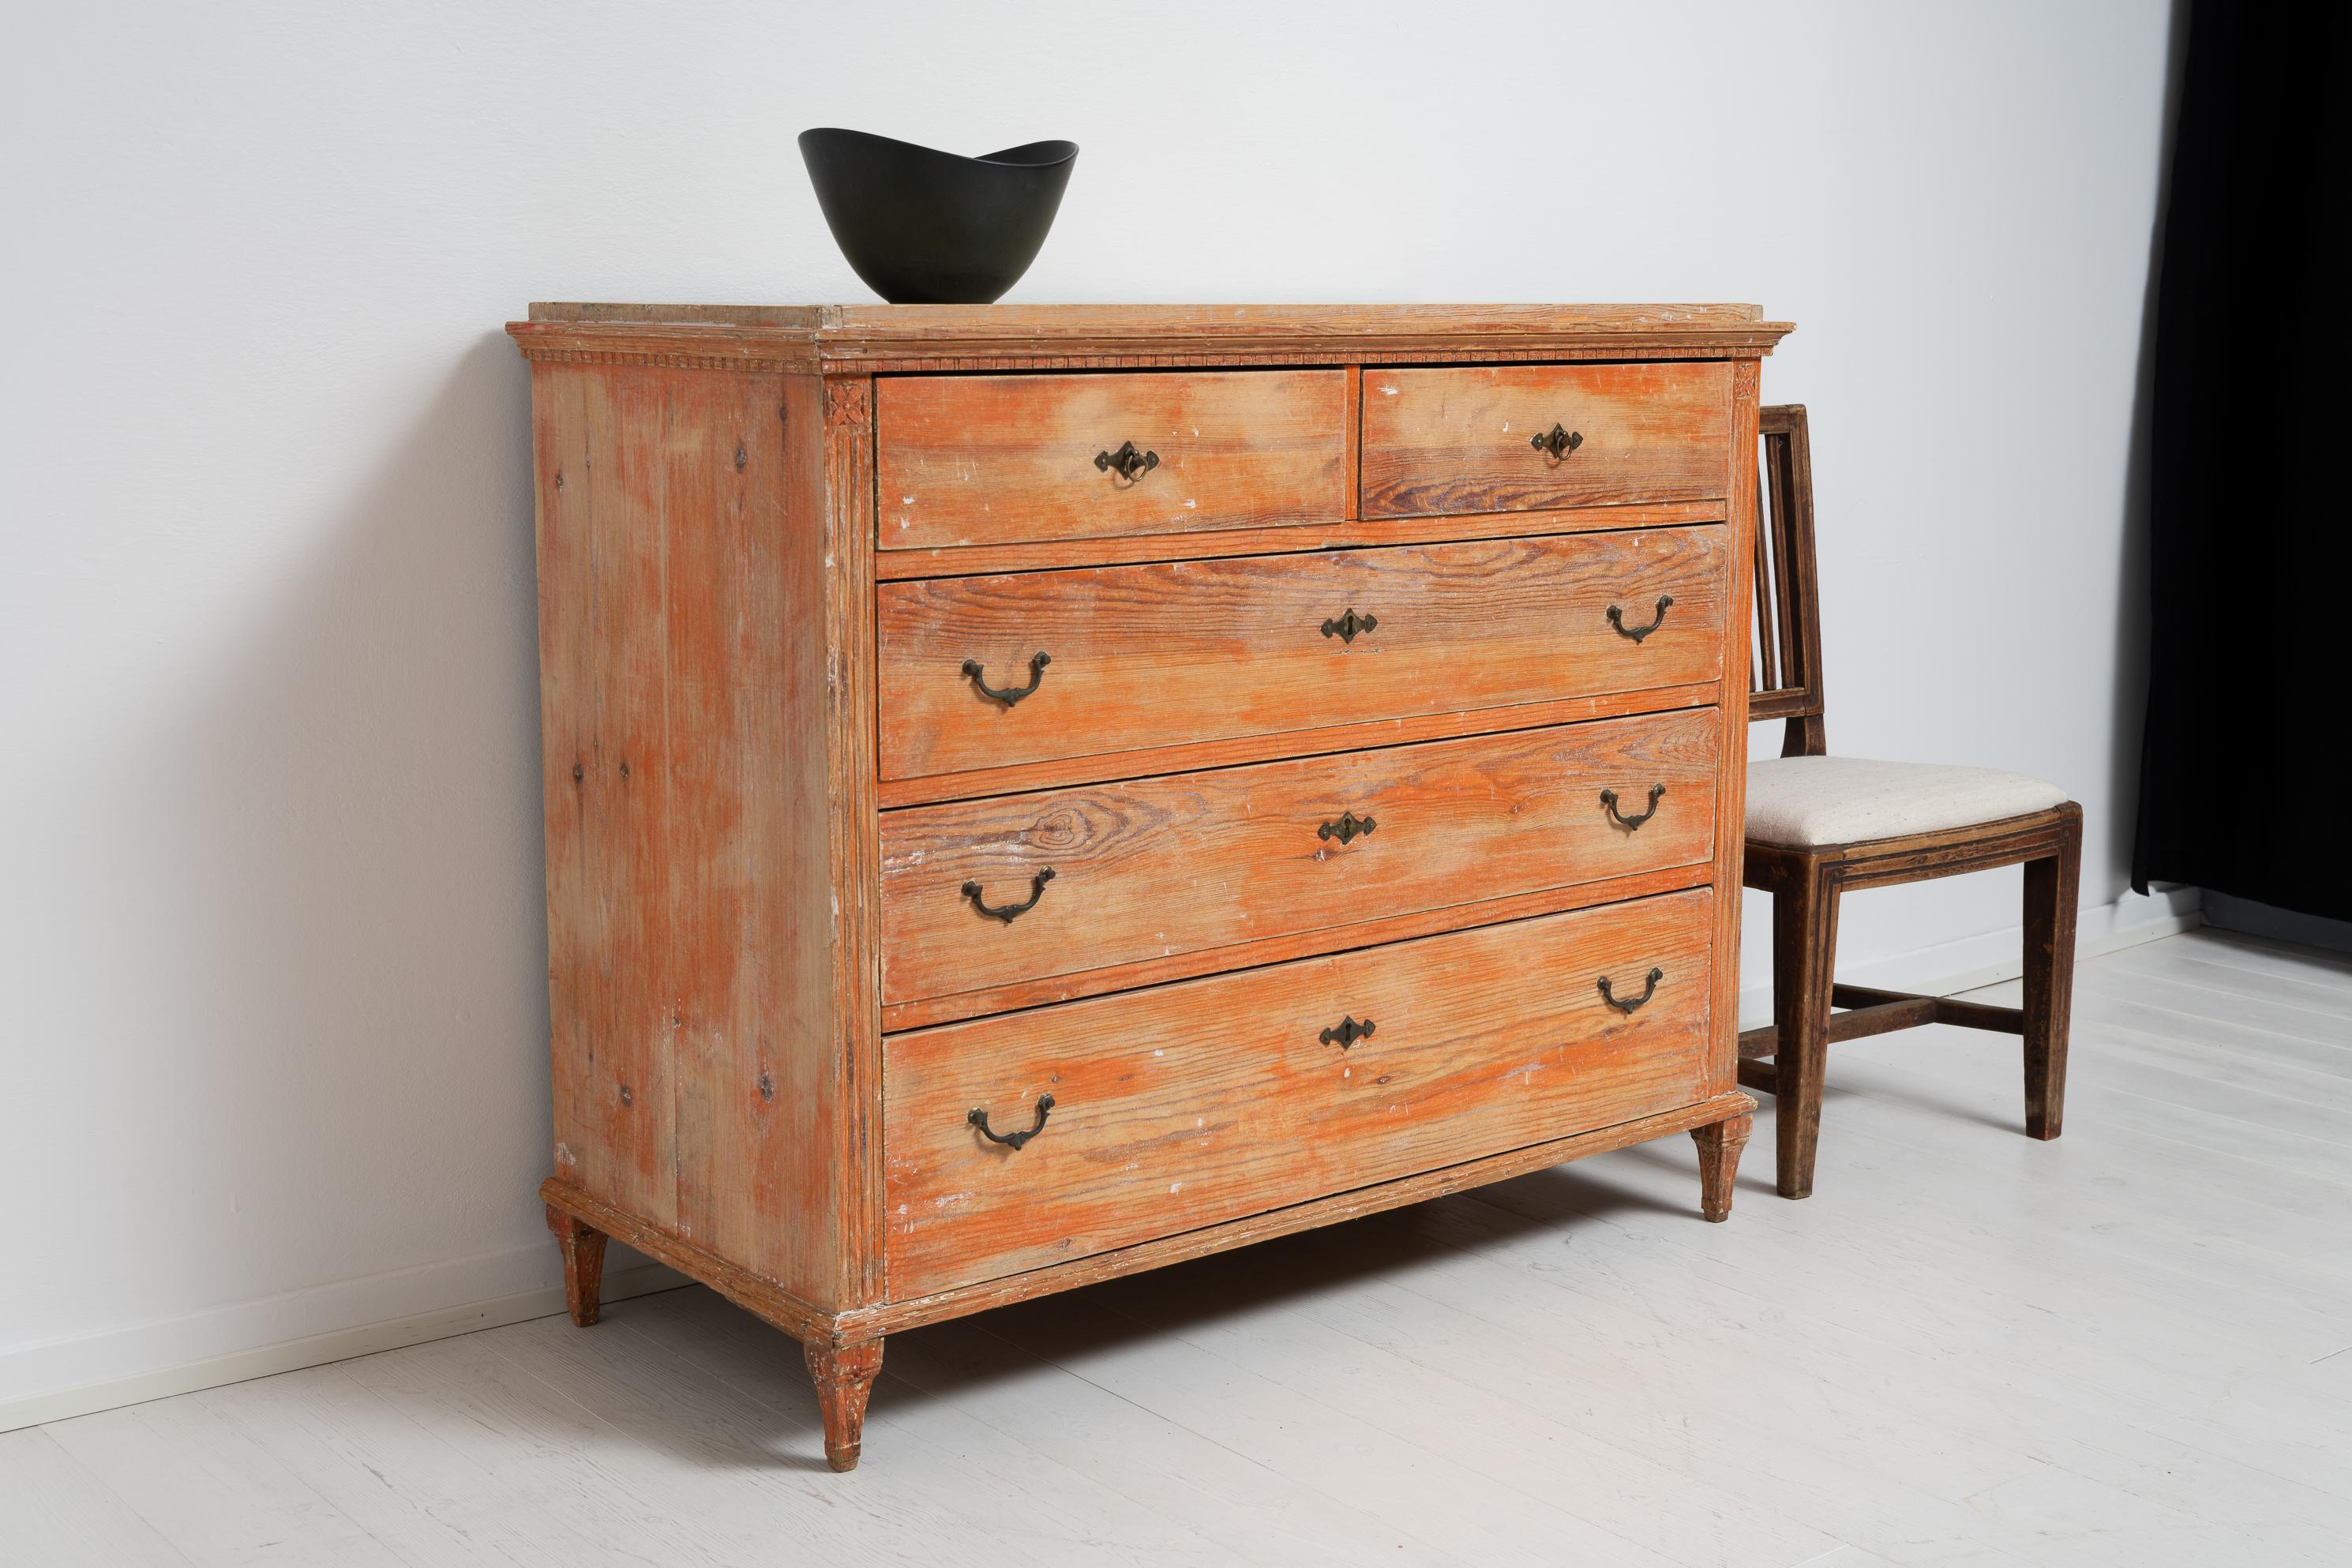 18th Century Swedish Gustavian Painted Chest of Drawers In Good Condition For Sale In Kramfors, SE